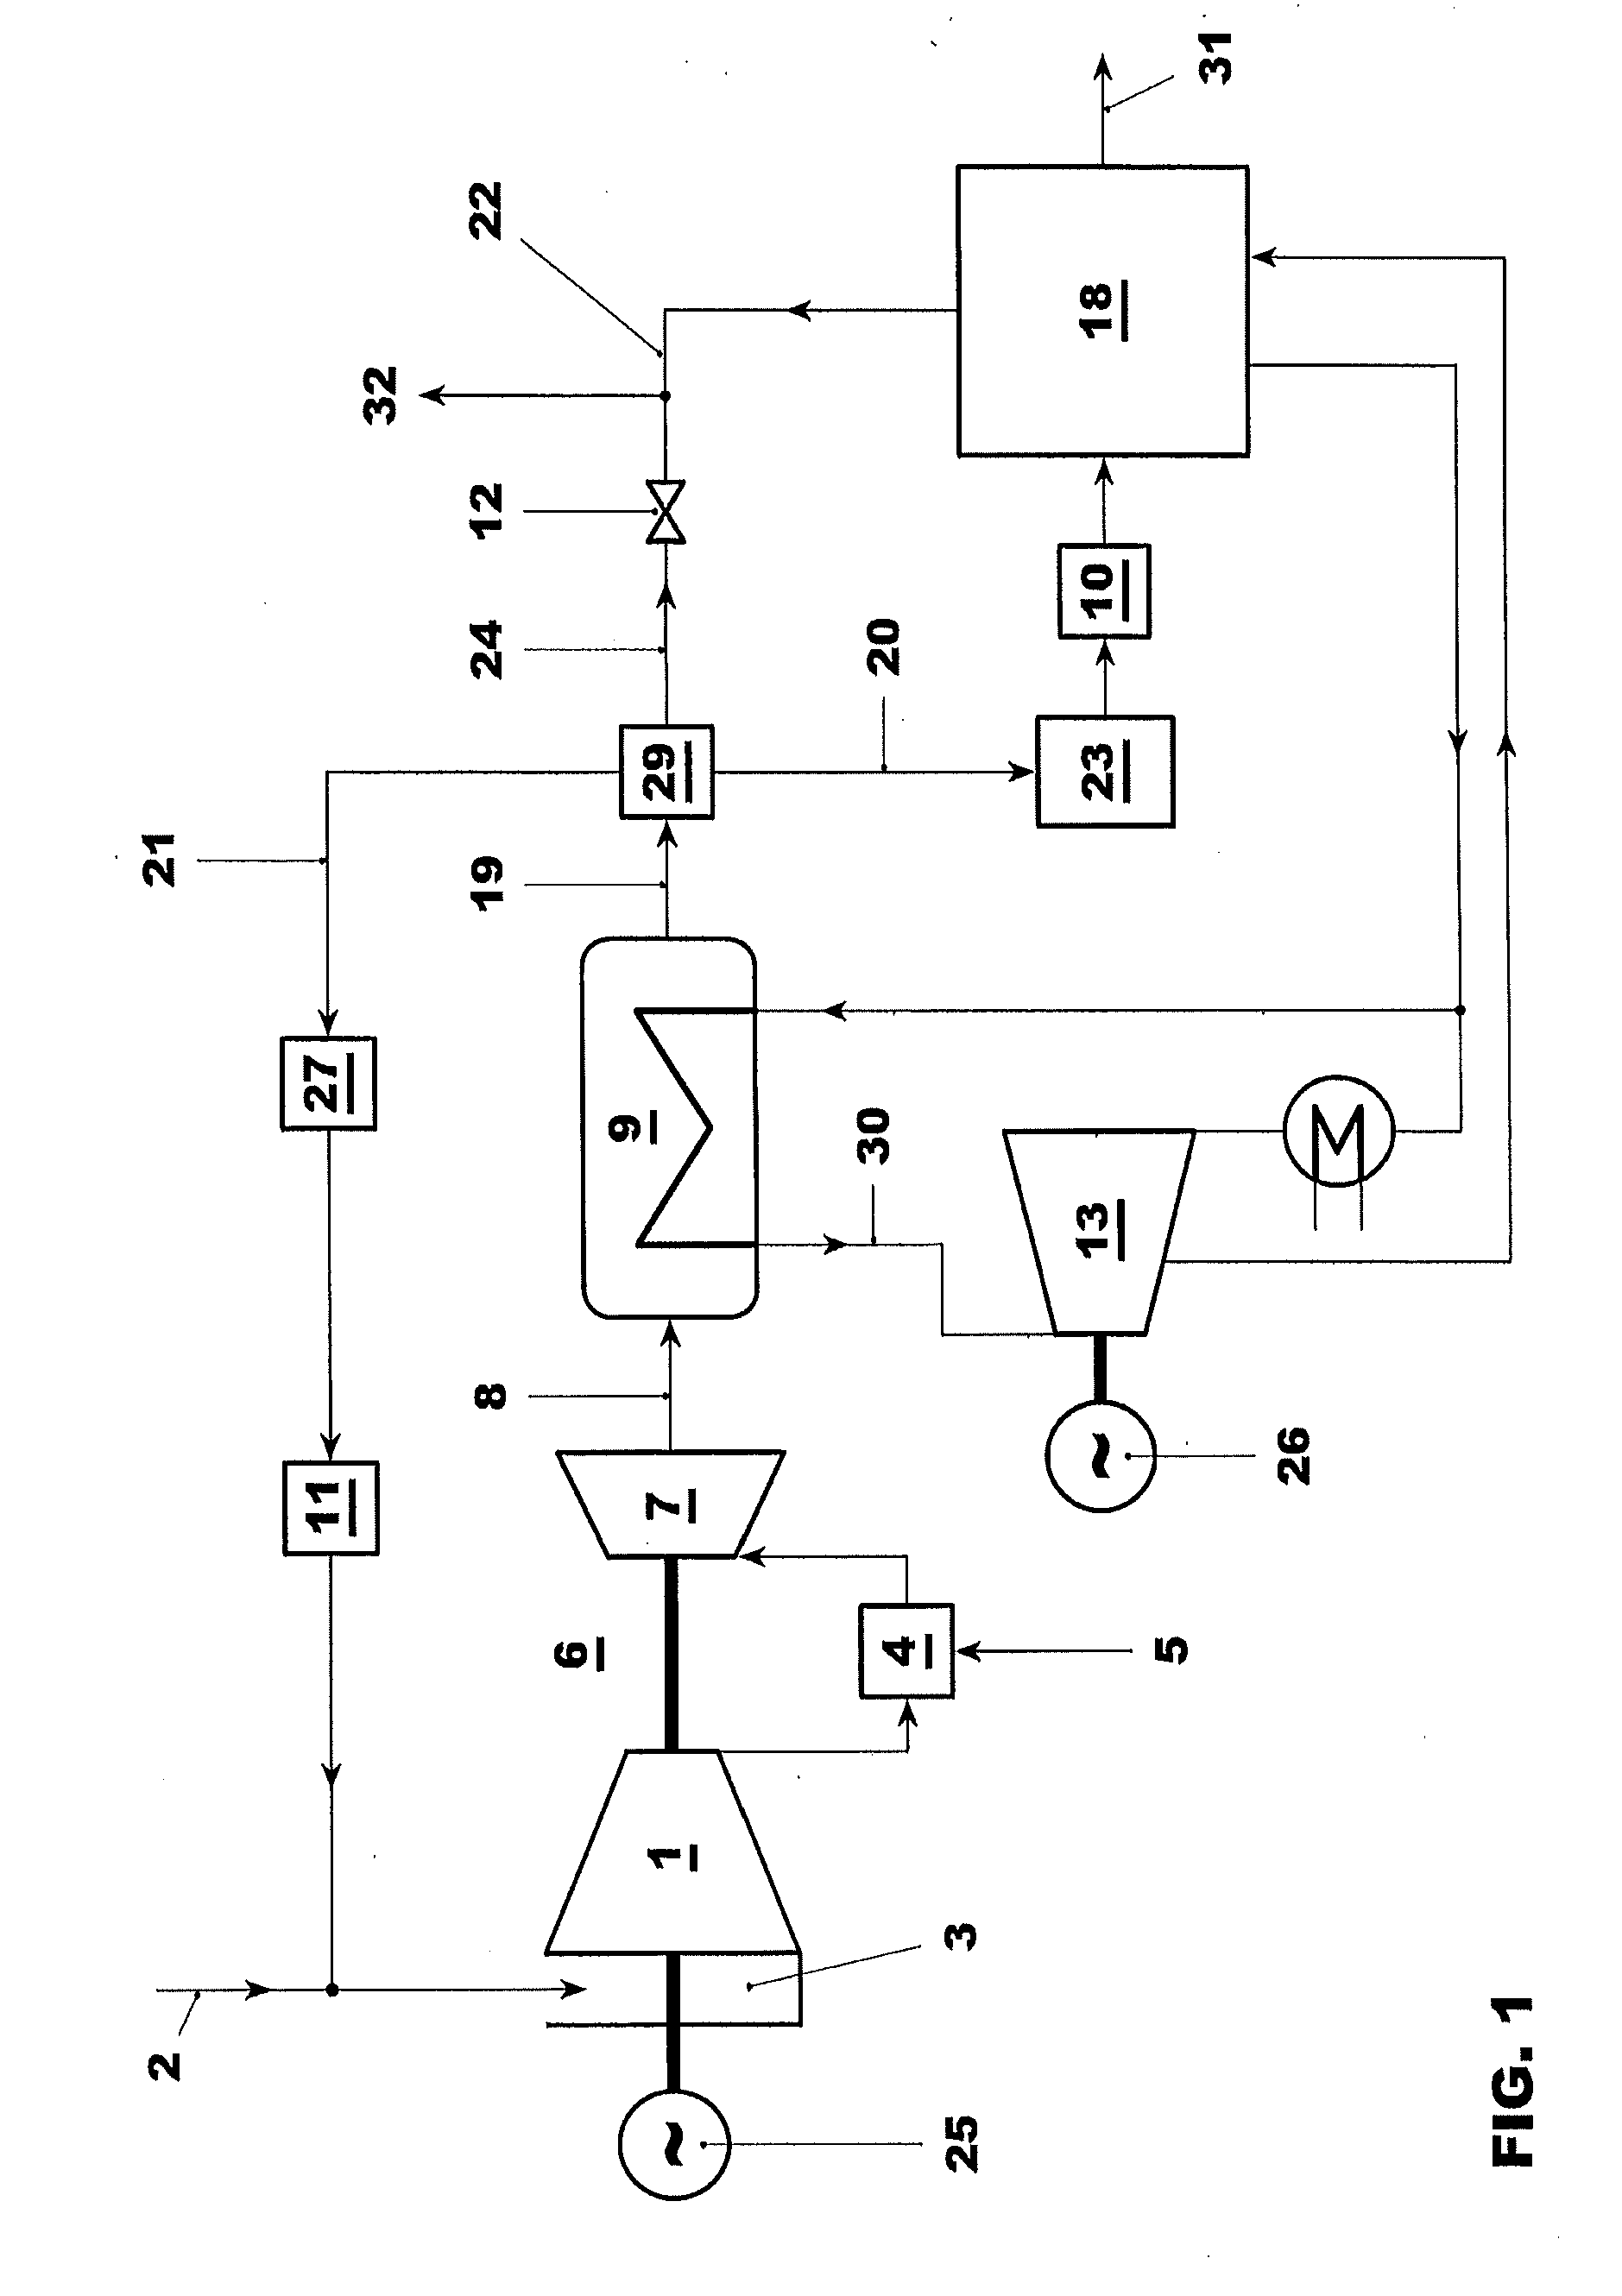 Gas turbine power plant with flue gas recirculation and oxygen-depleted cooling gas